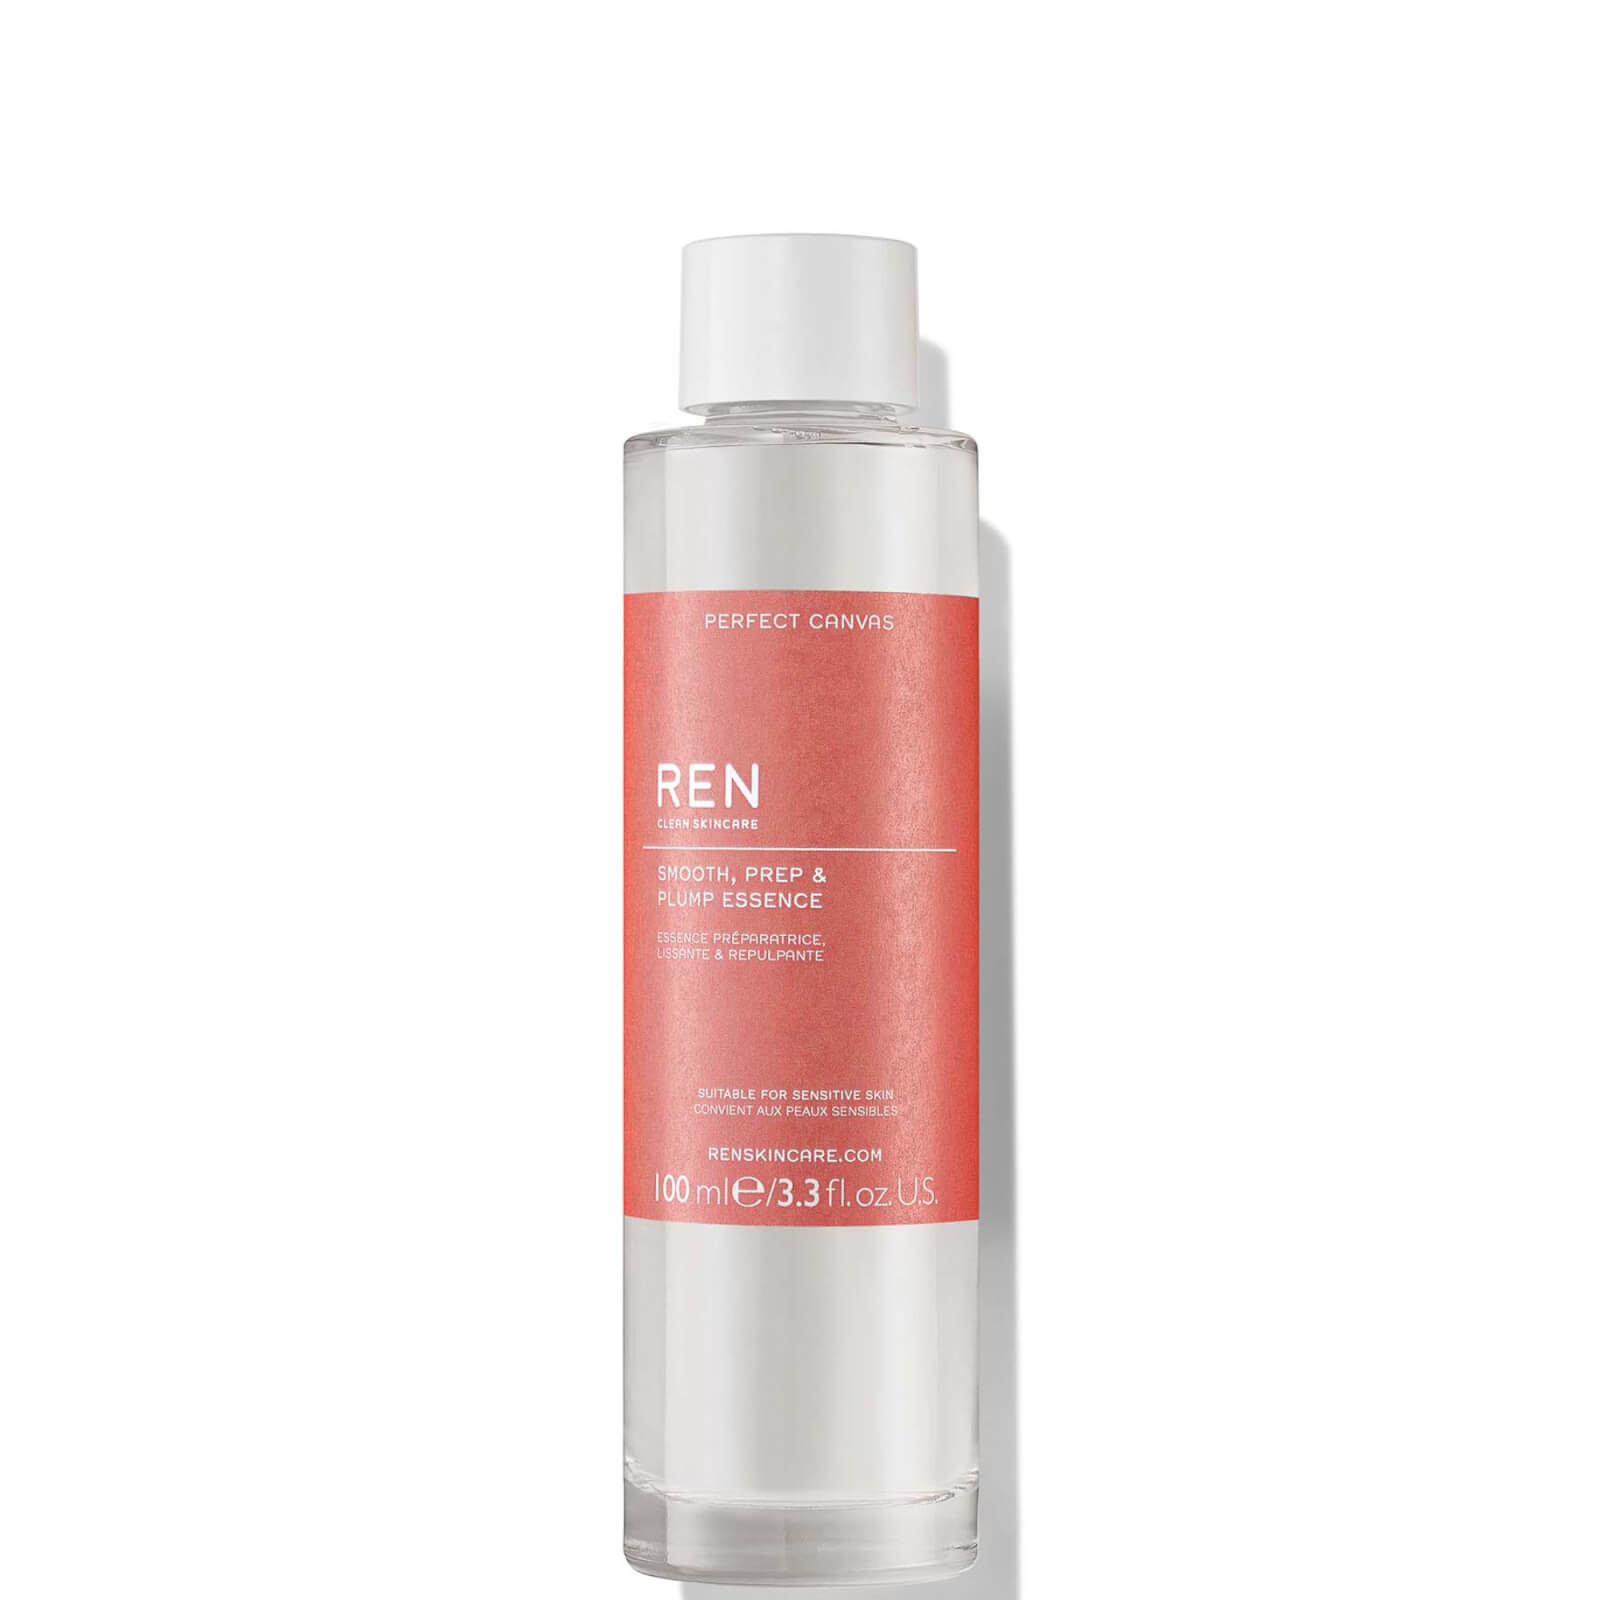 Photos - Facial / Body Cleansing Product REN Clean Skincare Perfect Canvas Smooth, Prep and Plump Essence 100ml 